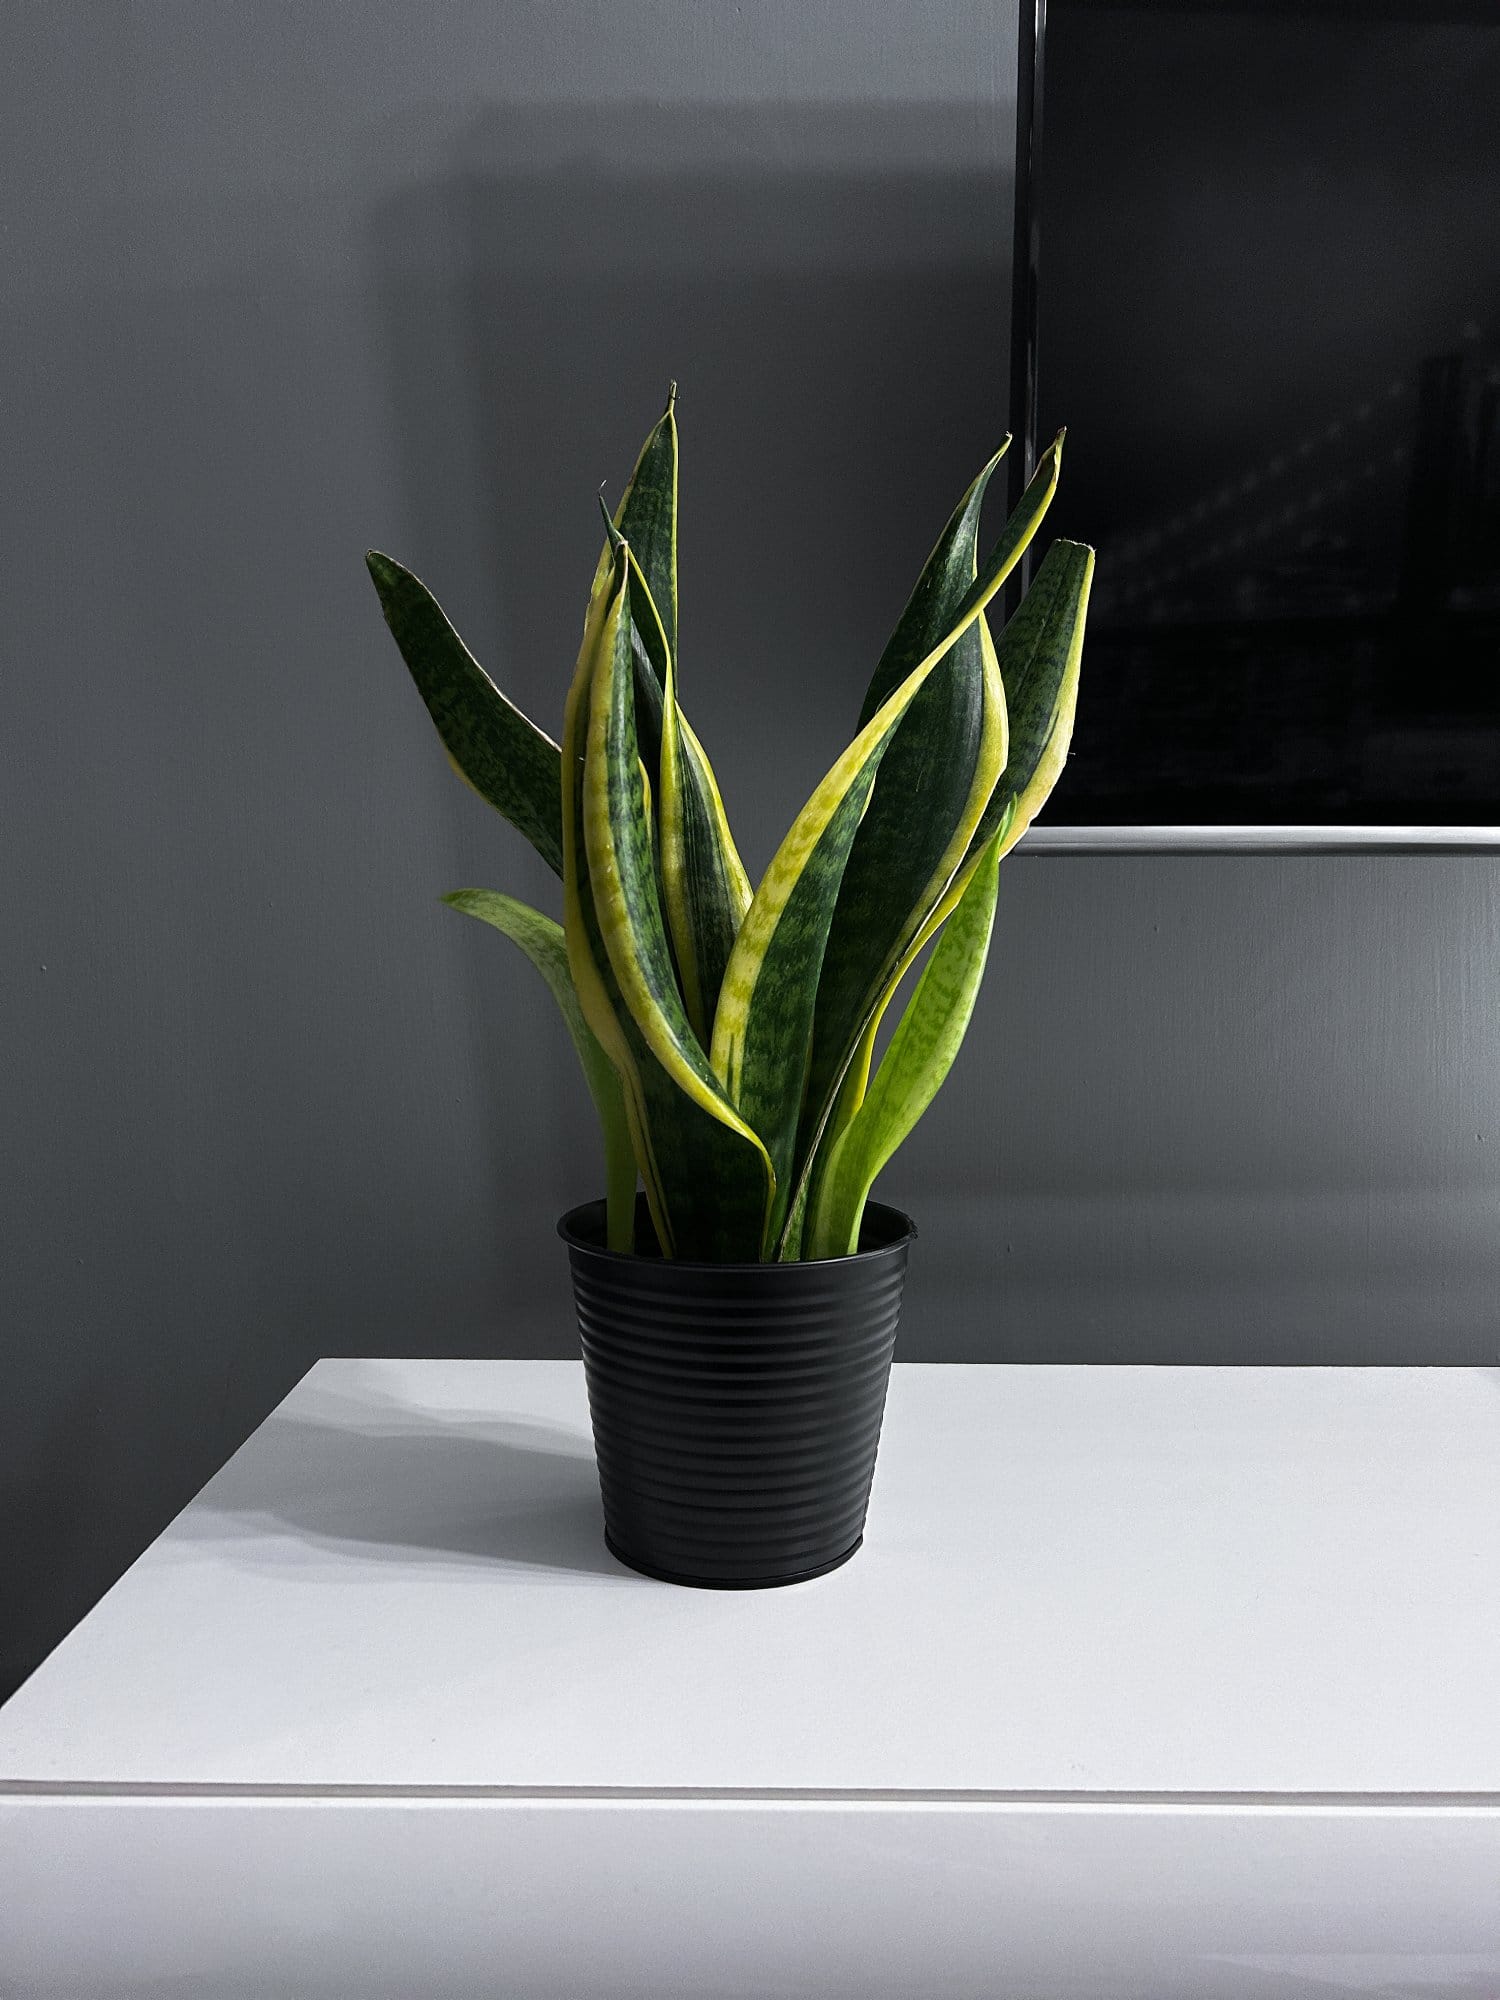 A potted snake plant with tall, slender leaves in a ribbed black pot, placed on a white table against a grey wall